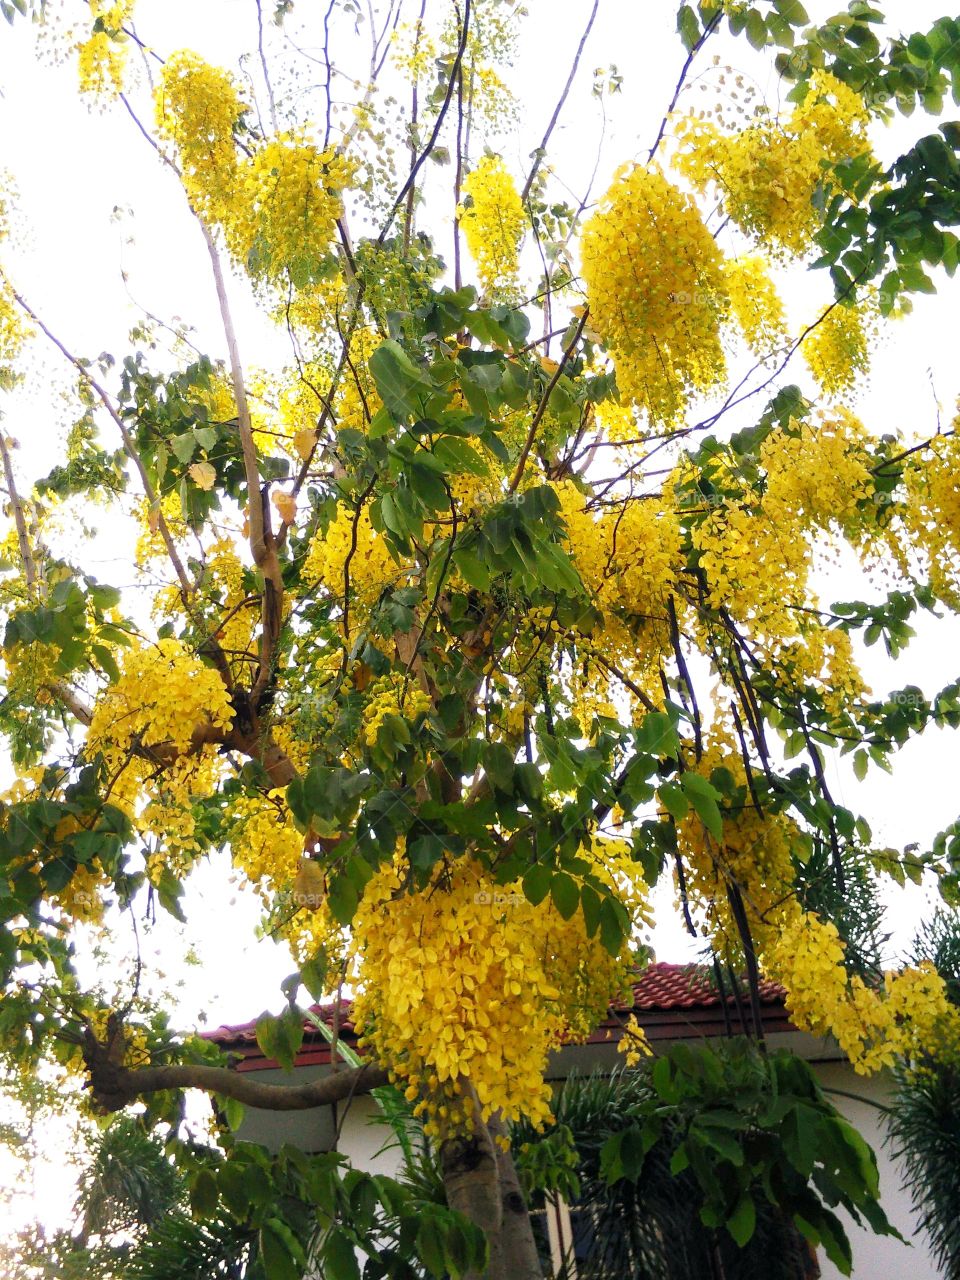 The golden shower. The golden shower tree in  front of my home